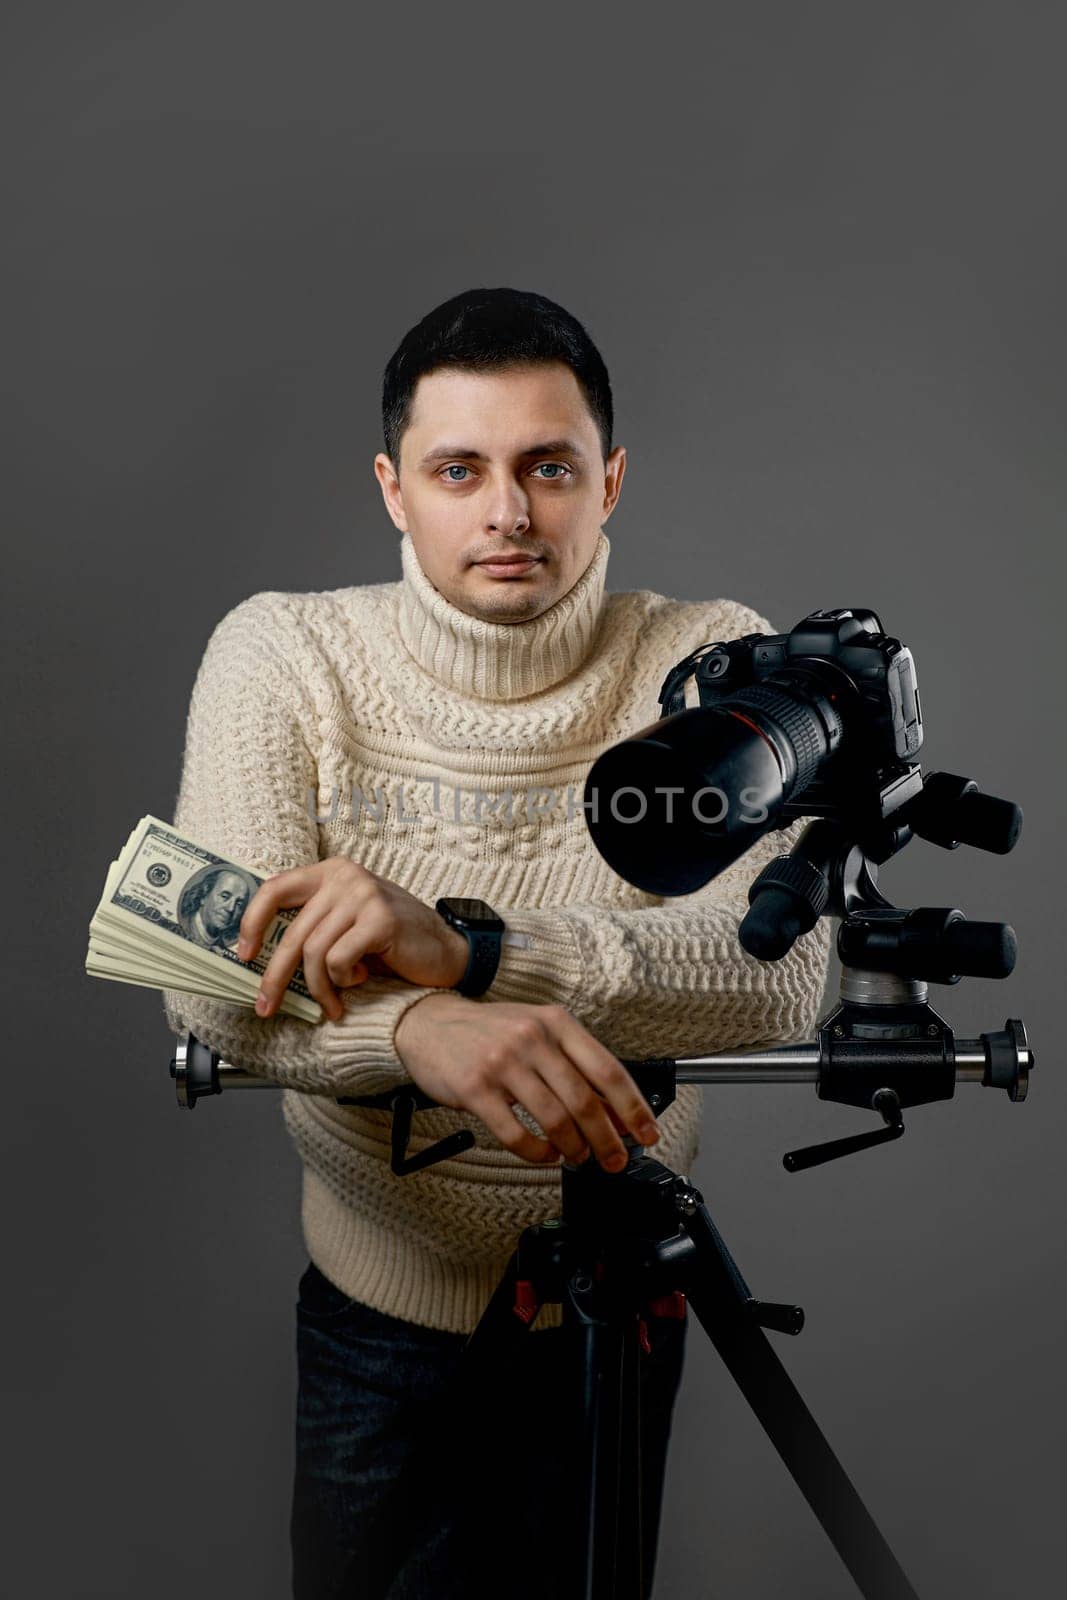 Professional photographer with digital camera on tripod holding hundred dollar bills on gray background